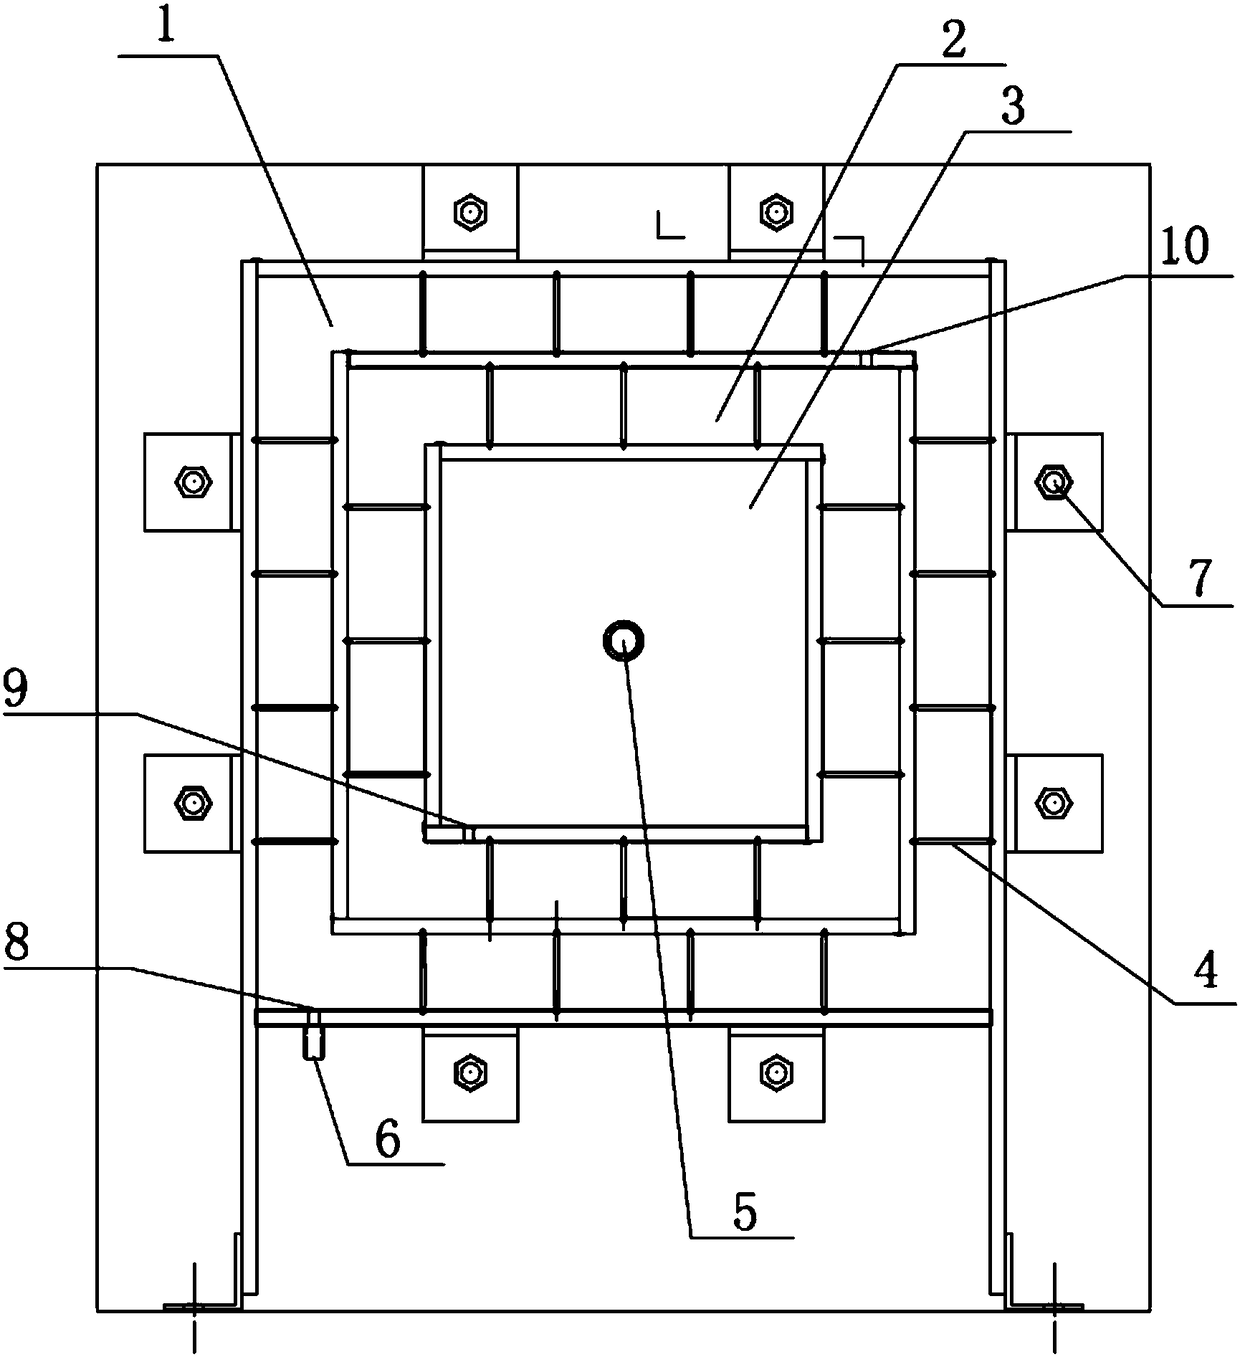 Atmospheric pressure tapping device